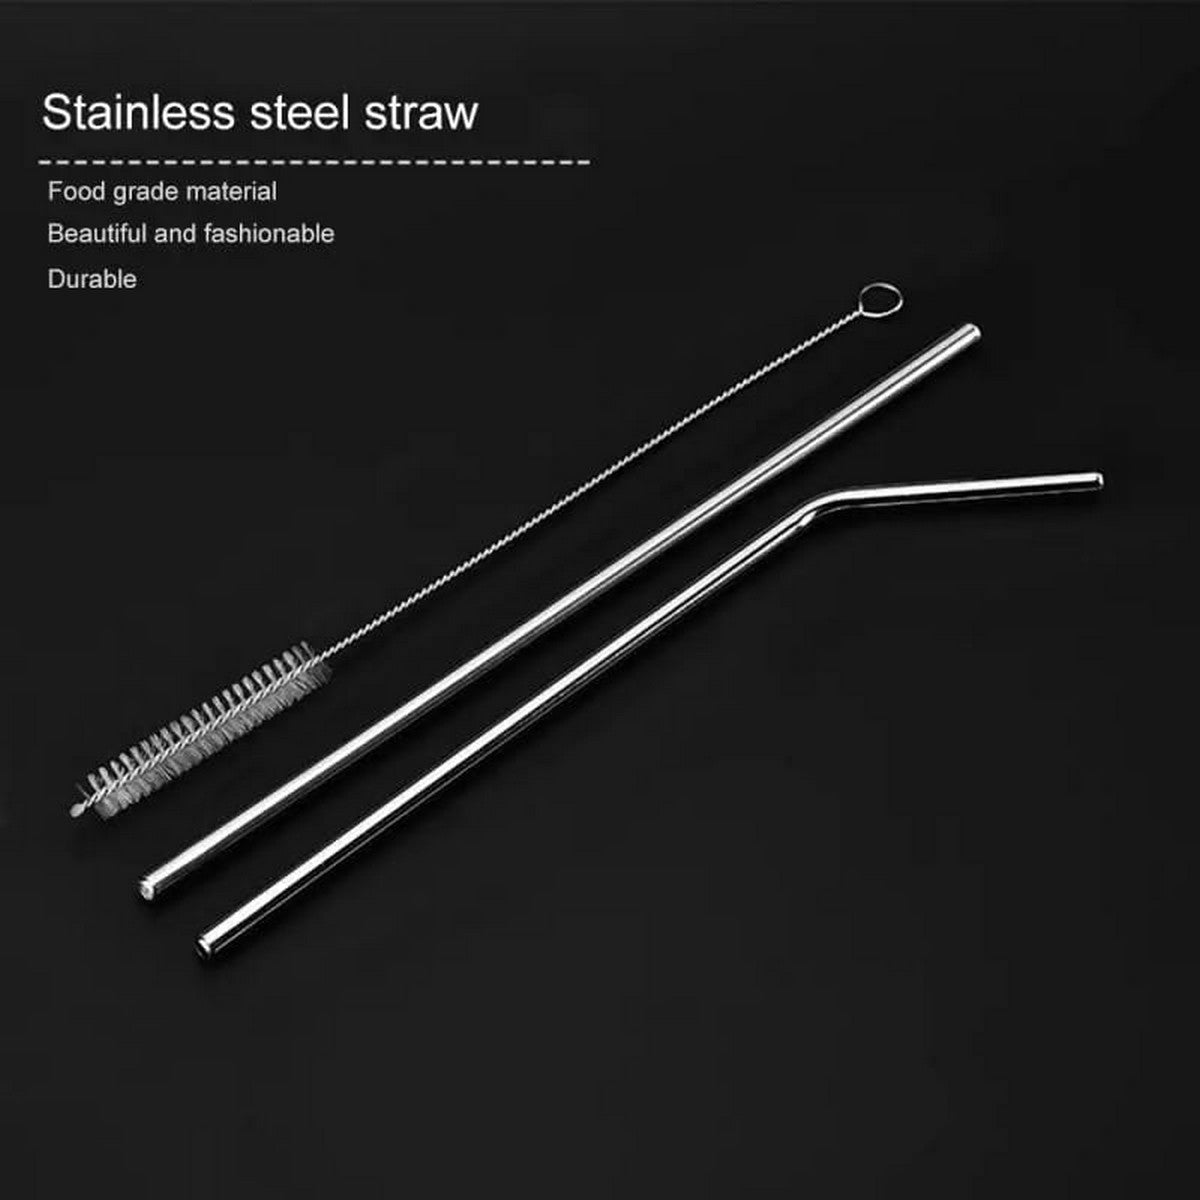 Reusable Stainless Steel Metal Straw with Cleaning Brush